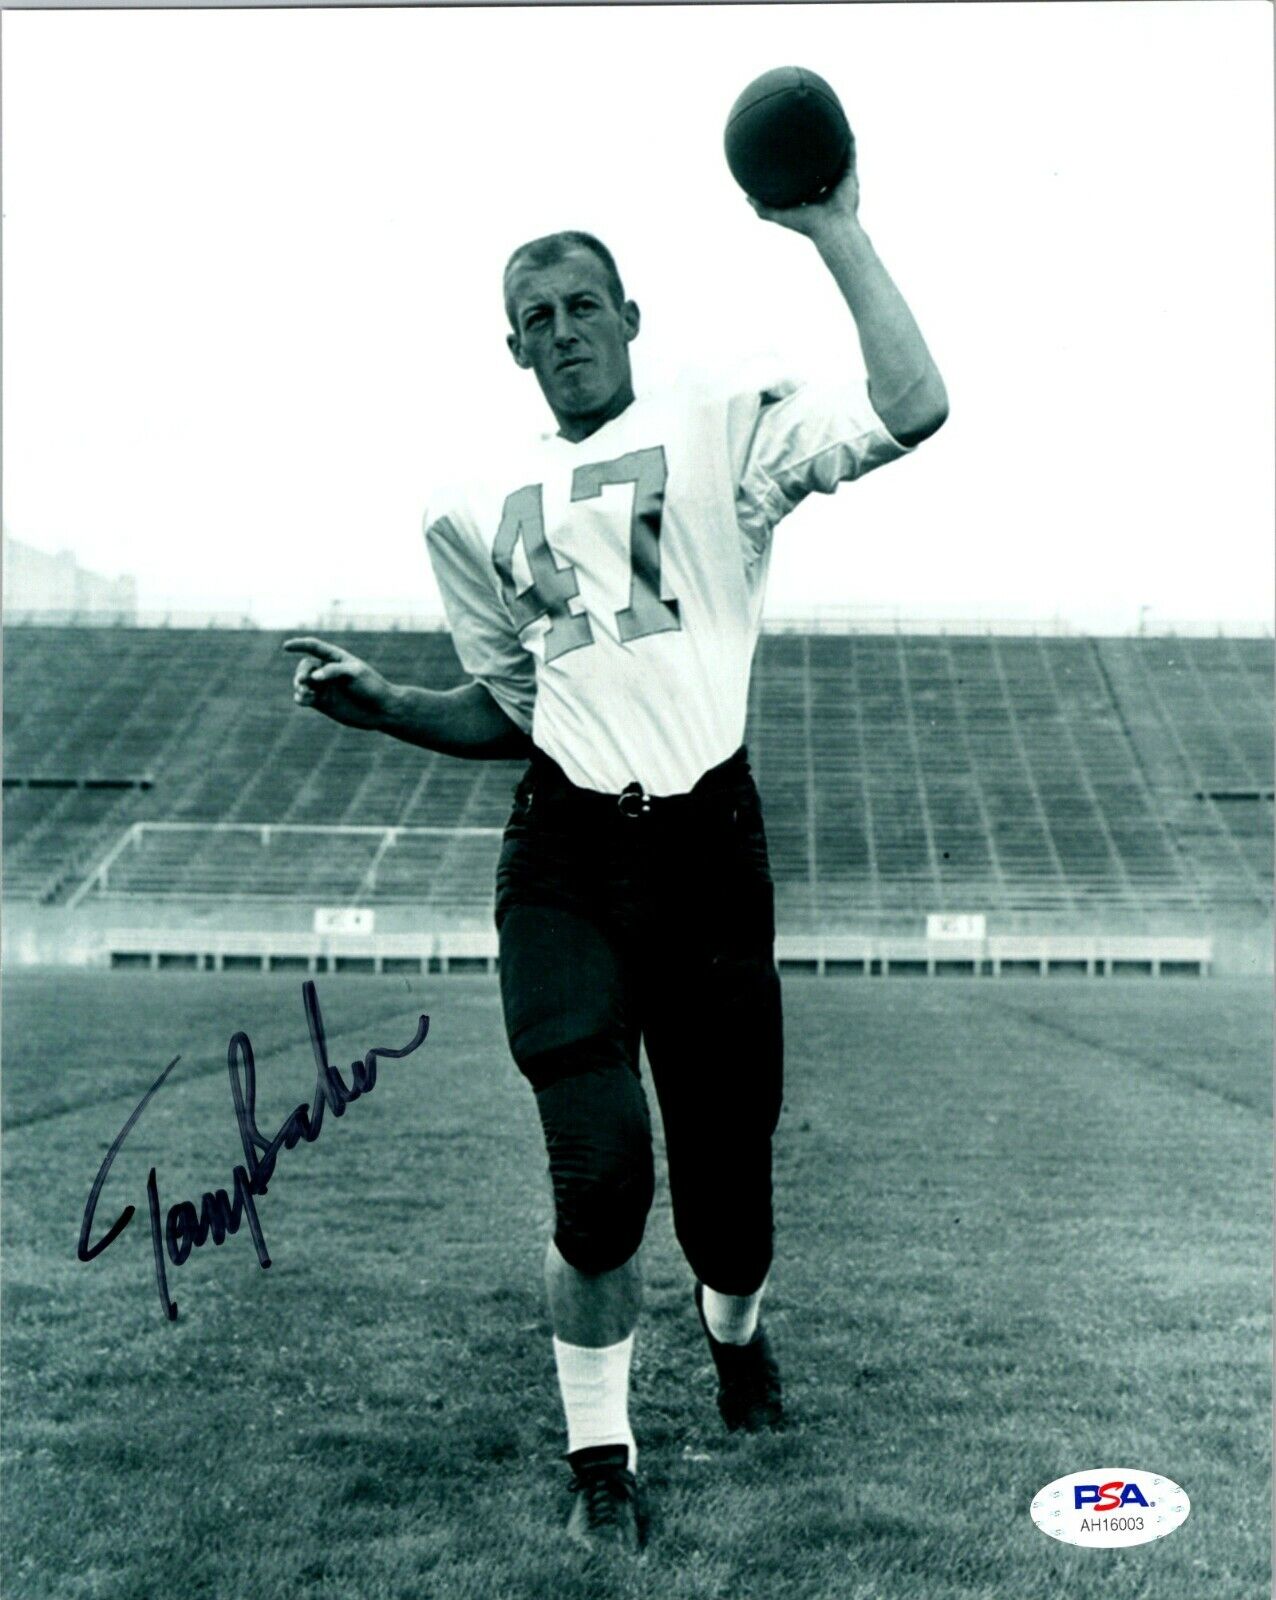 Terry Baker Heisman 1962 Signed 8x10 B&W Photo with PSA COA In Excellent Cond.